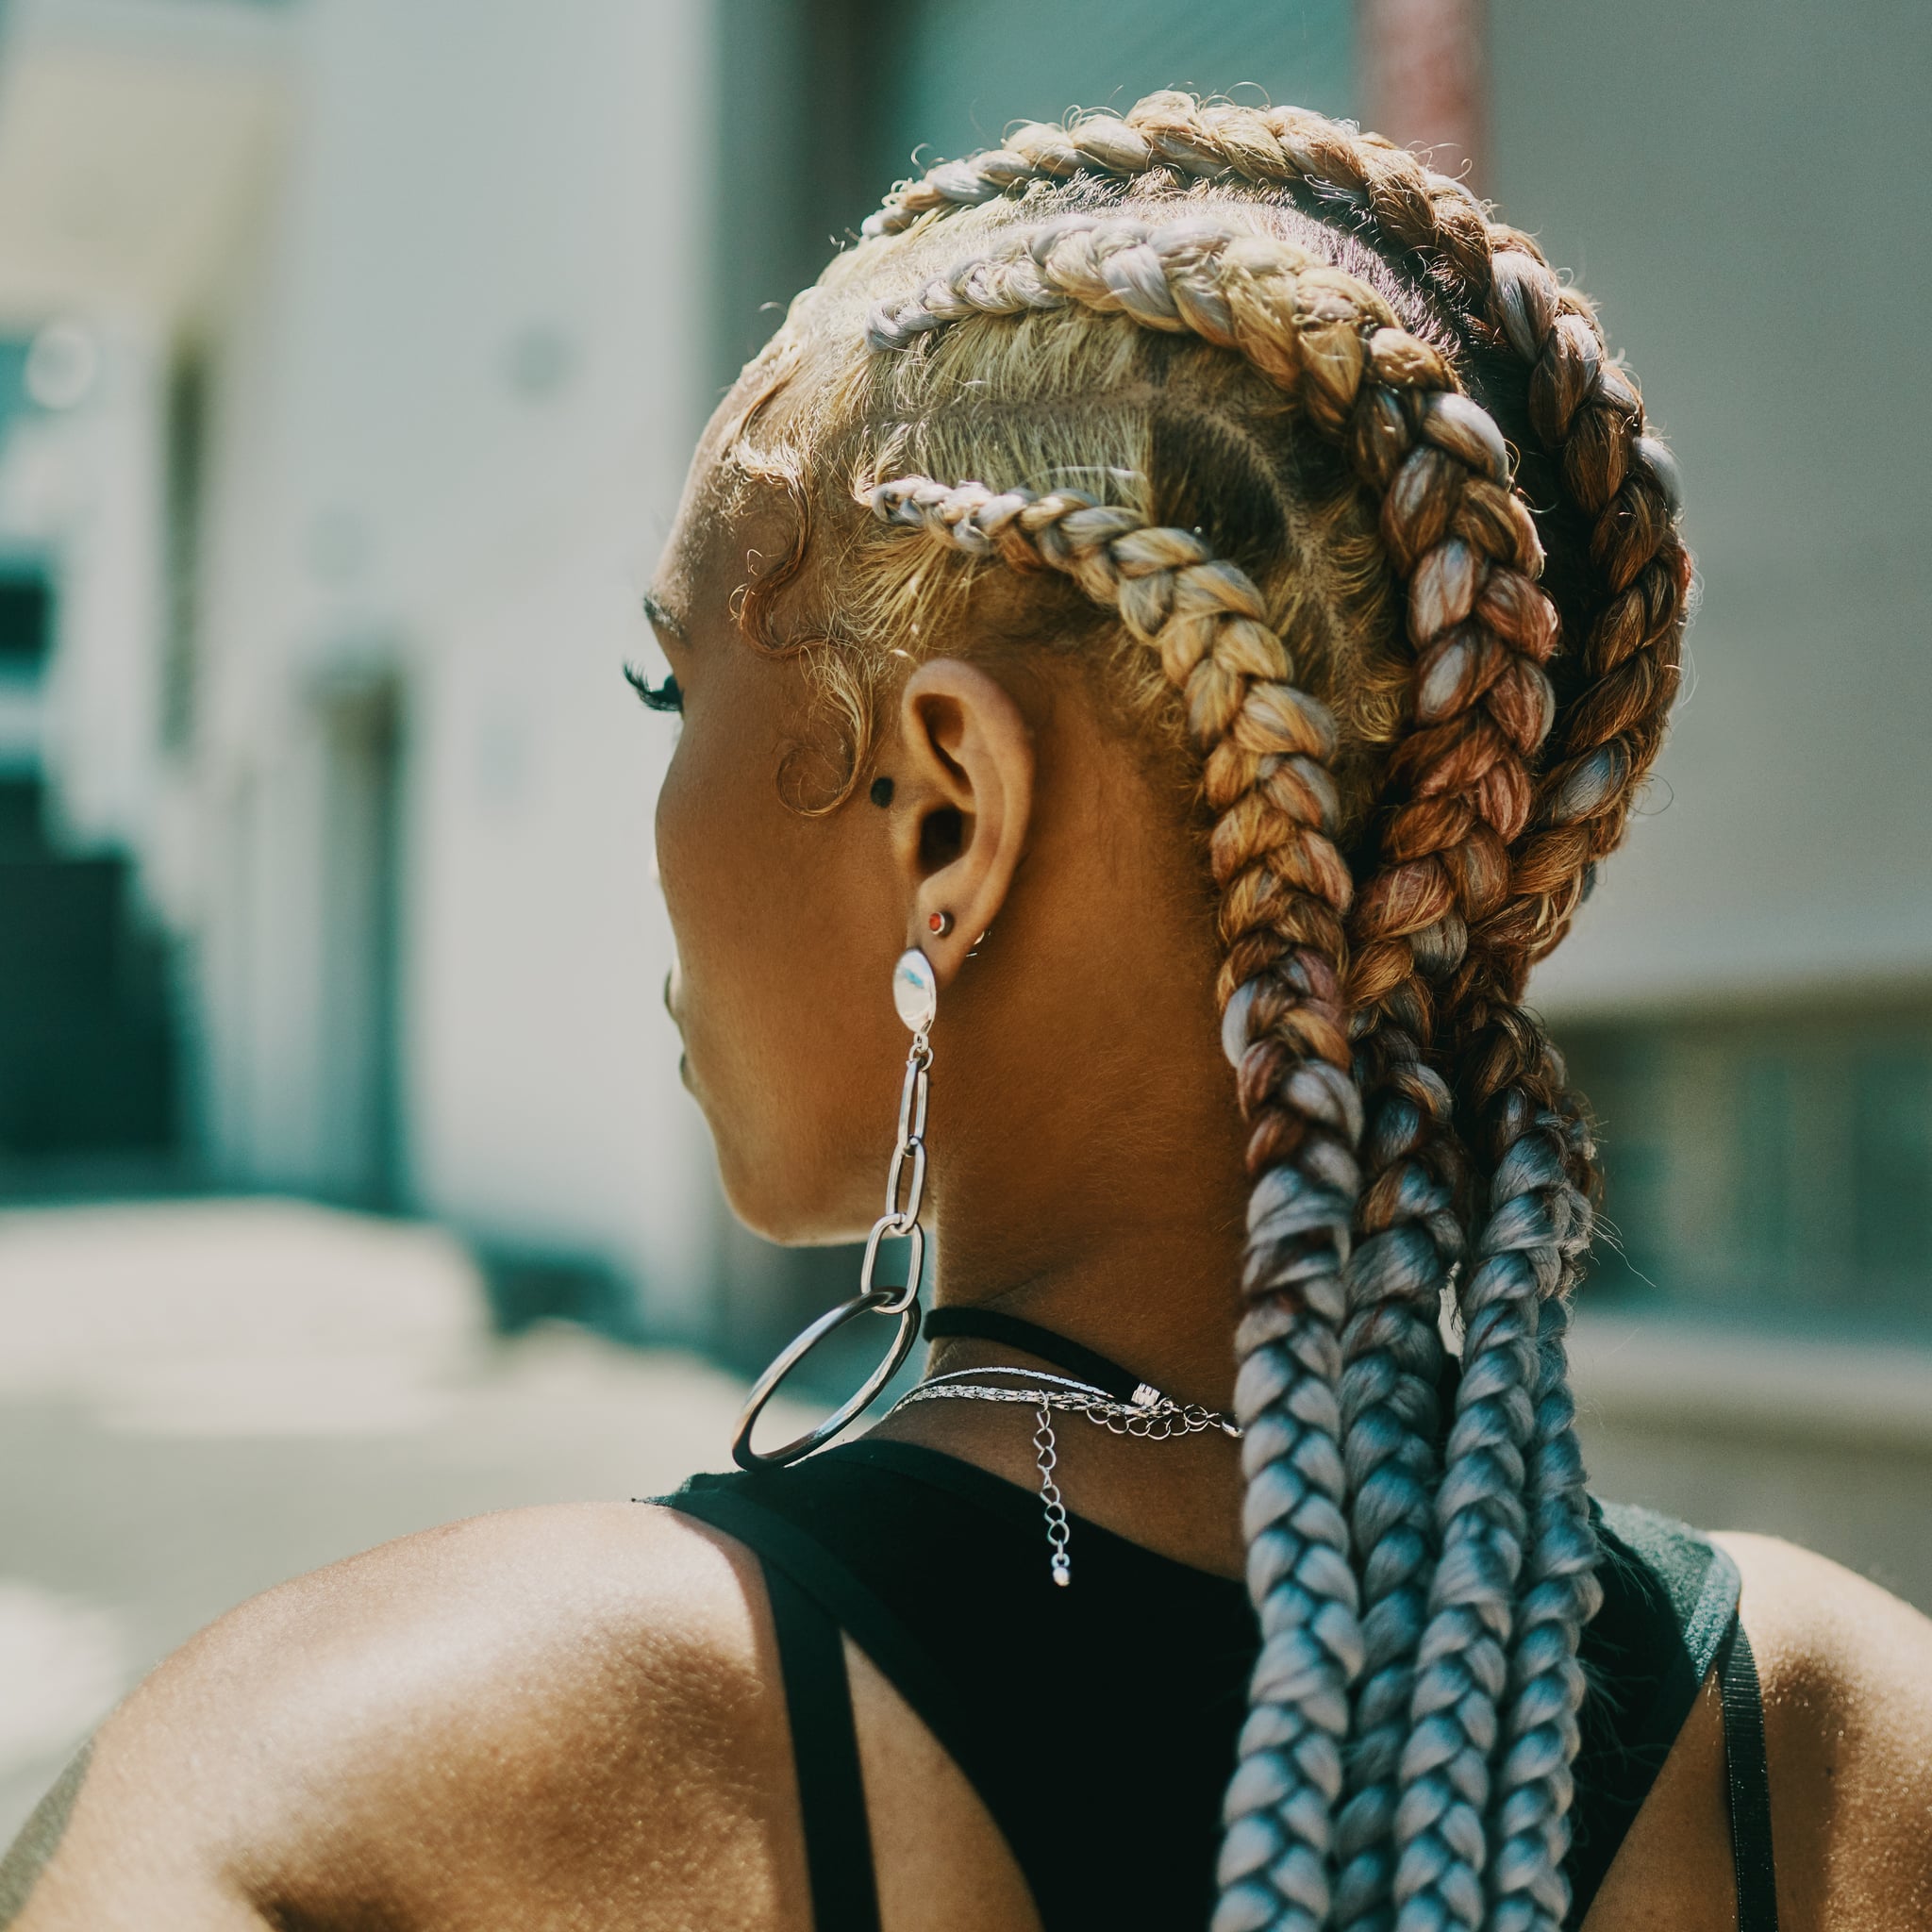 Designer Cornrows Is The Braided Hairstyle Trend Of 22 Popsugar Beauty